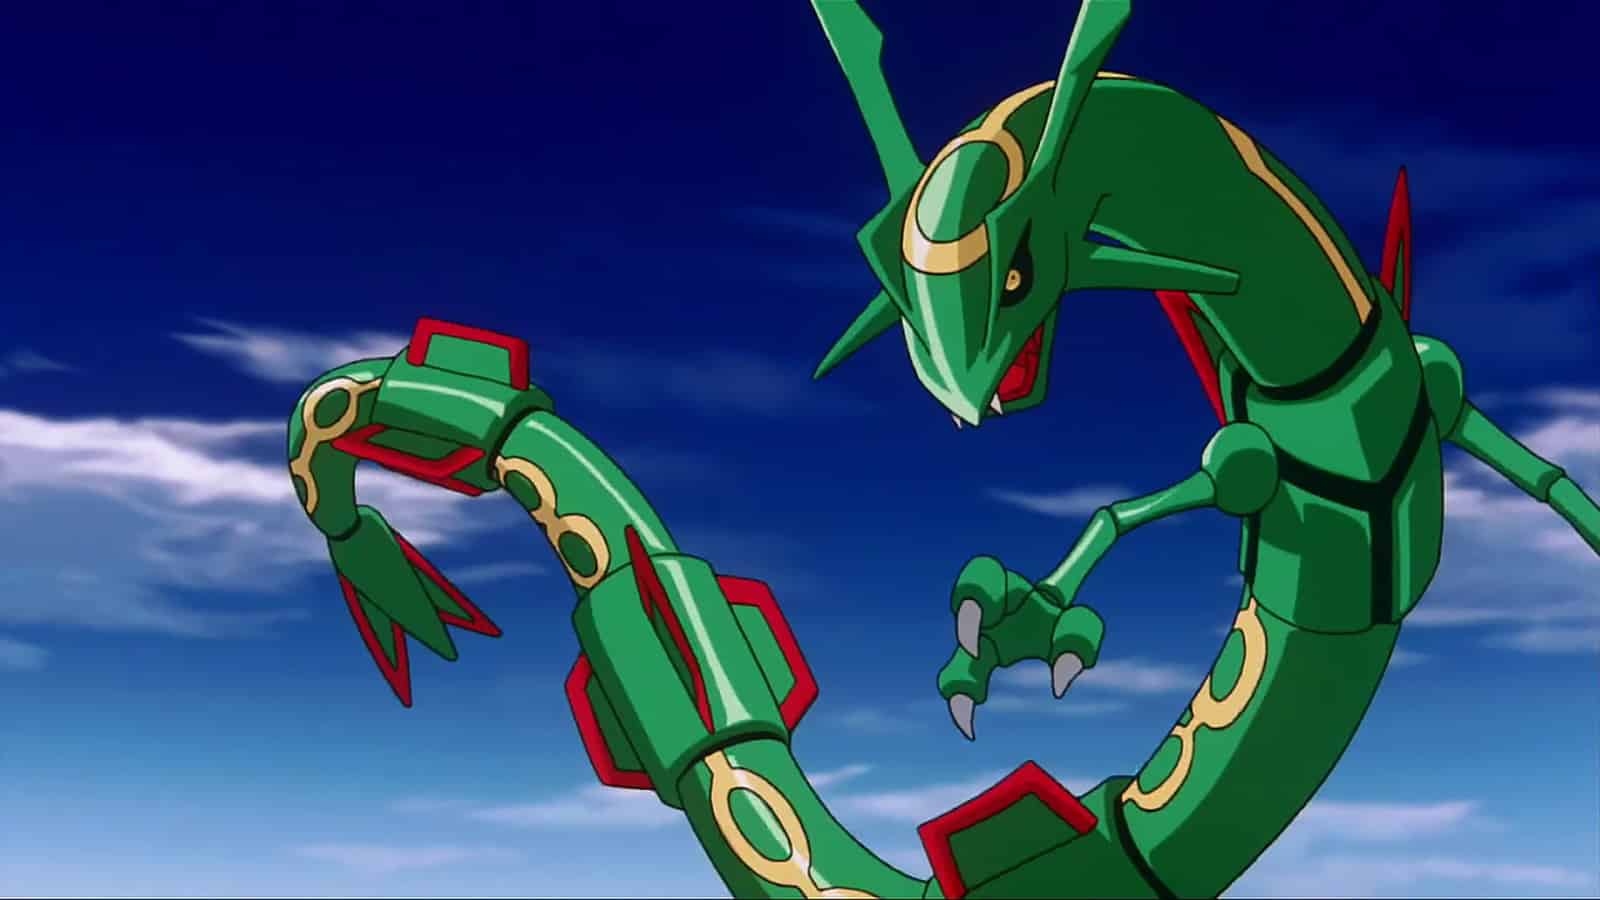 Rayquaza from the Pokemon anime